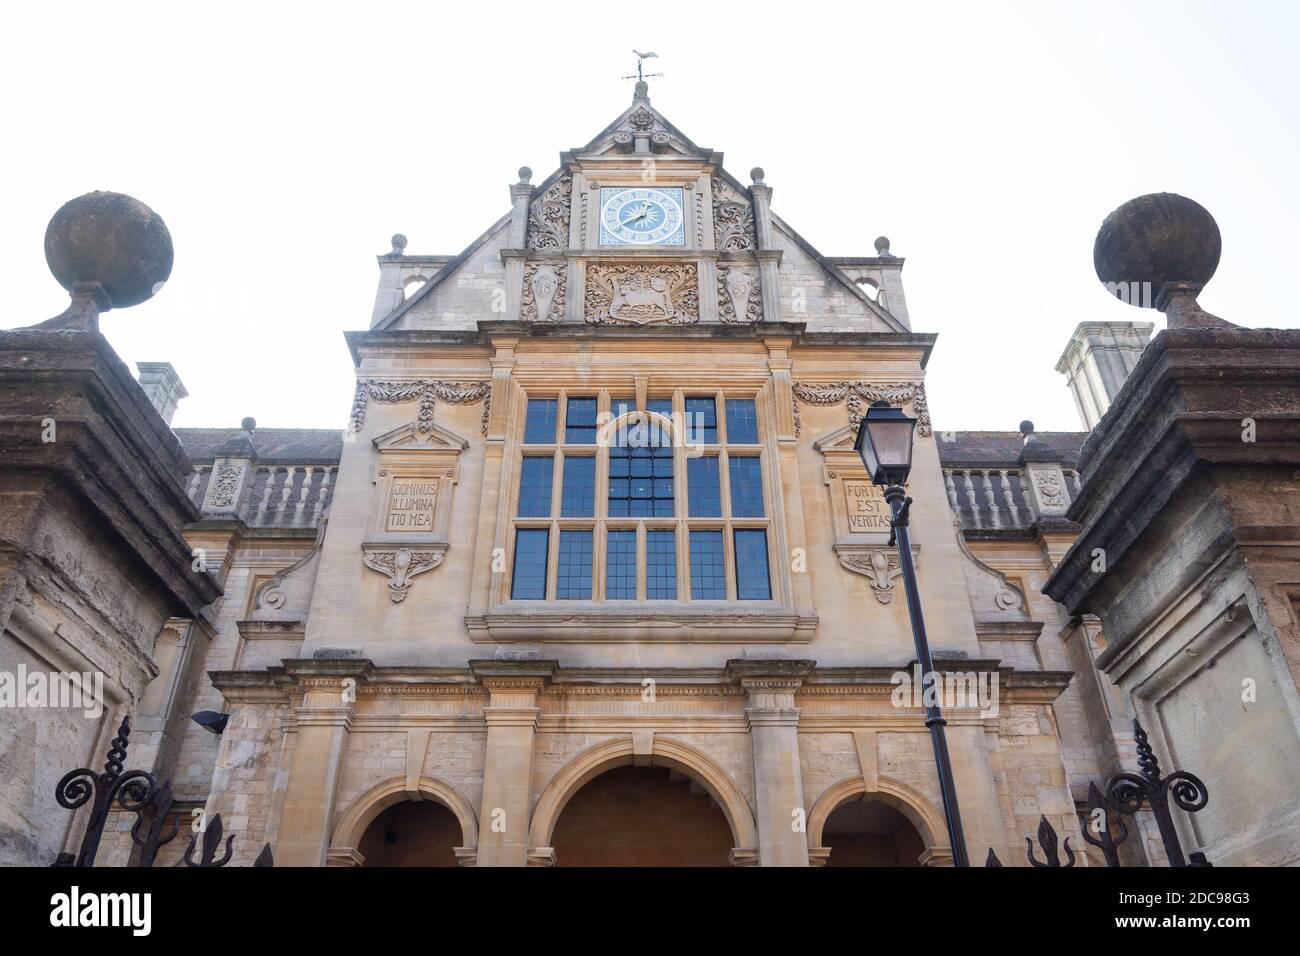 Faculty of History building, Oxford University, George Street, Oxford, Oxfordshire, England, United Kingdom Stock Photo